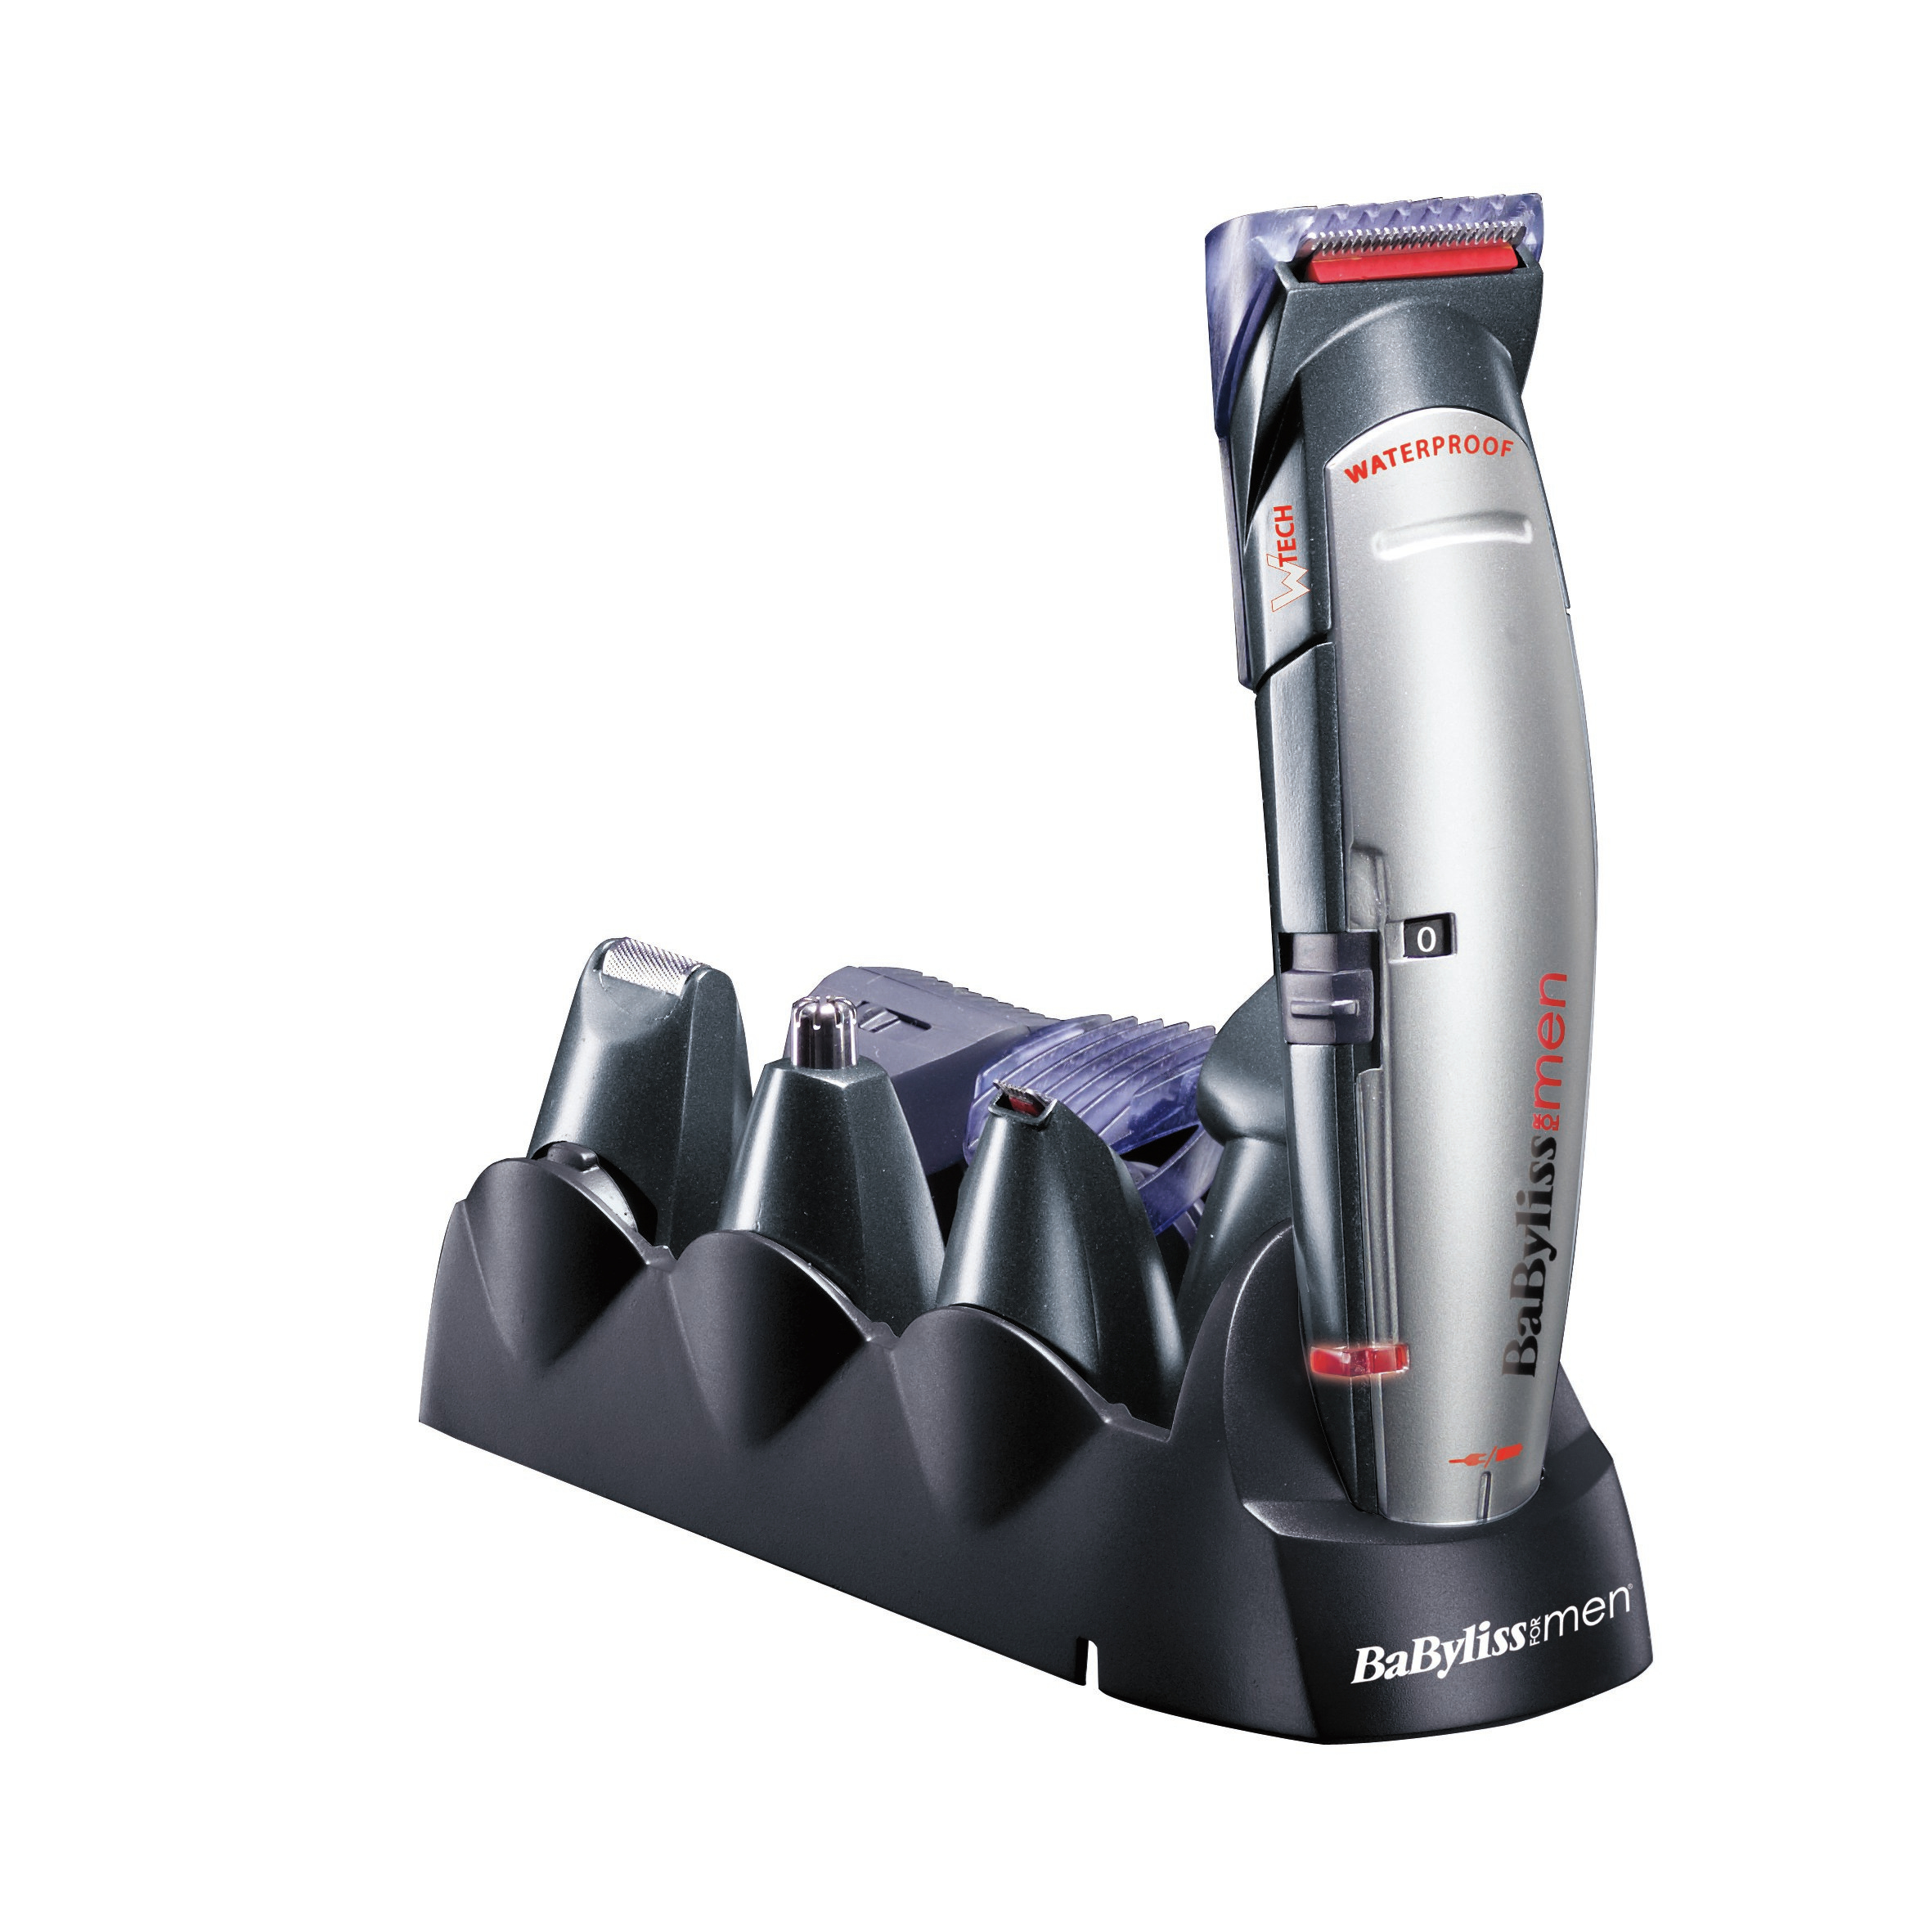 Babyliss Multifunktionstrimmer 10 in 1 W-tech